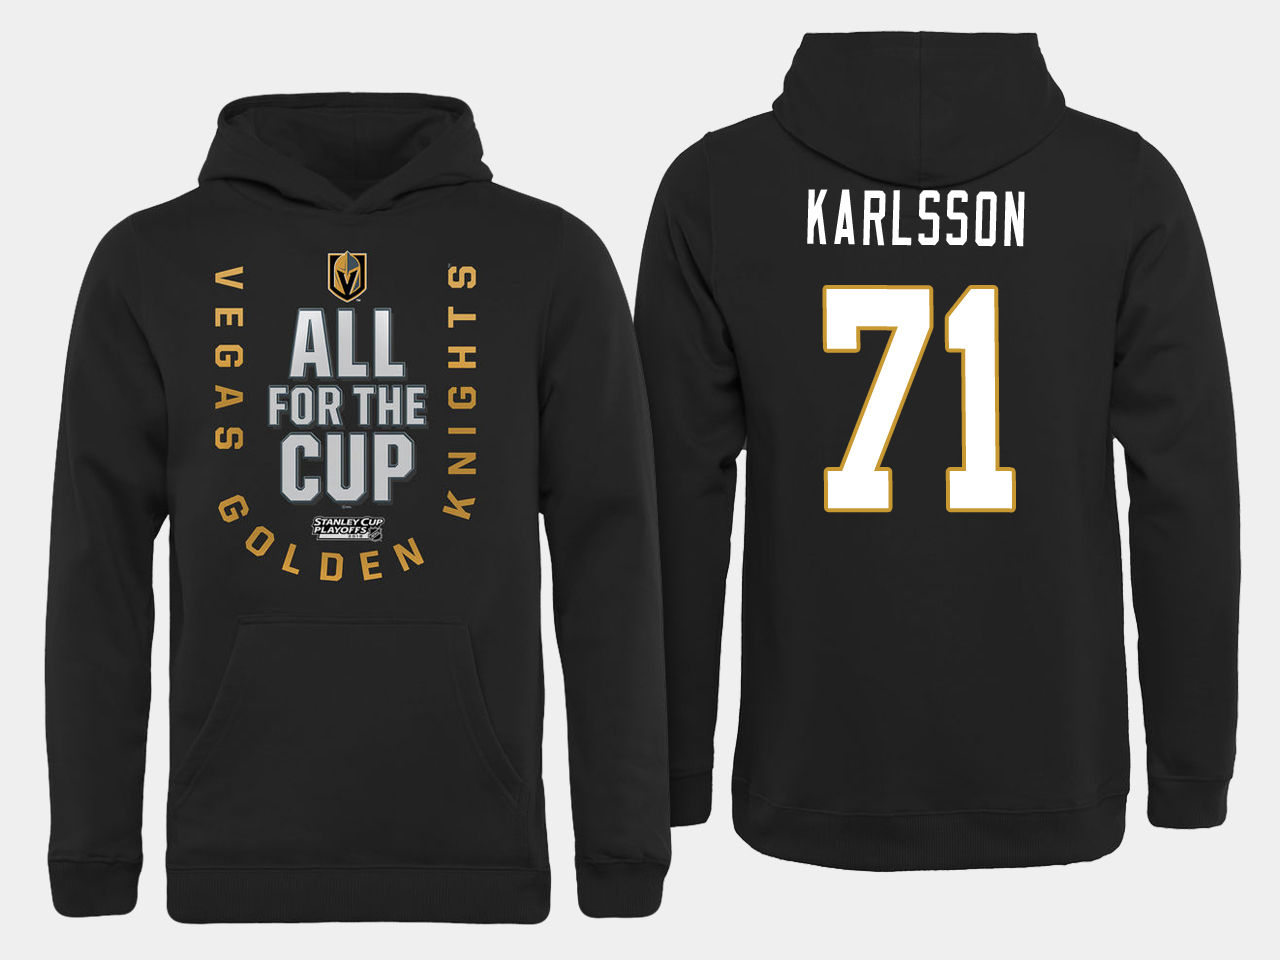 Men NHL Vegas Golden Knights 71 Karlsson All for the Cup hoodie